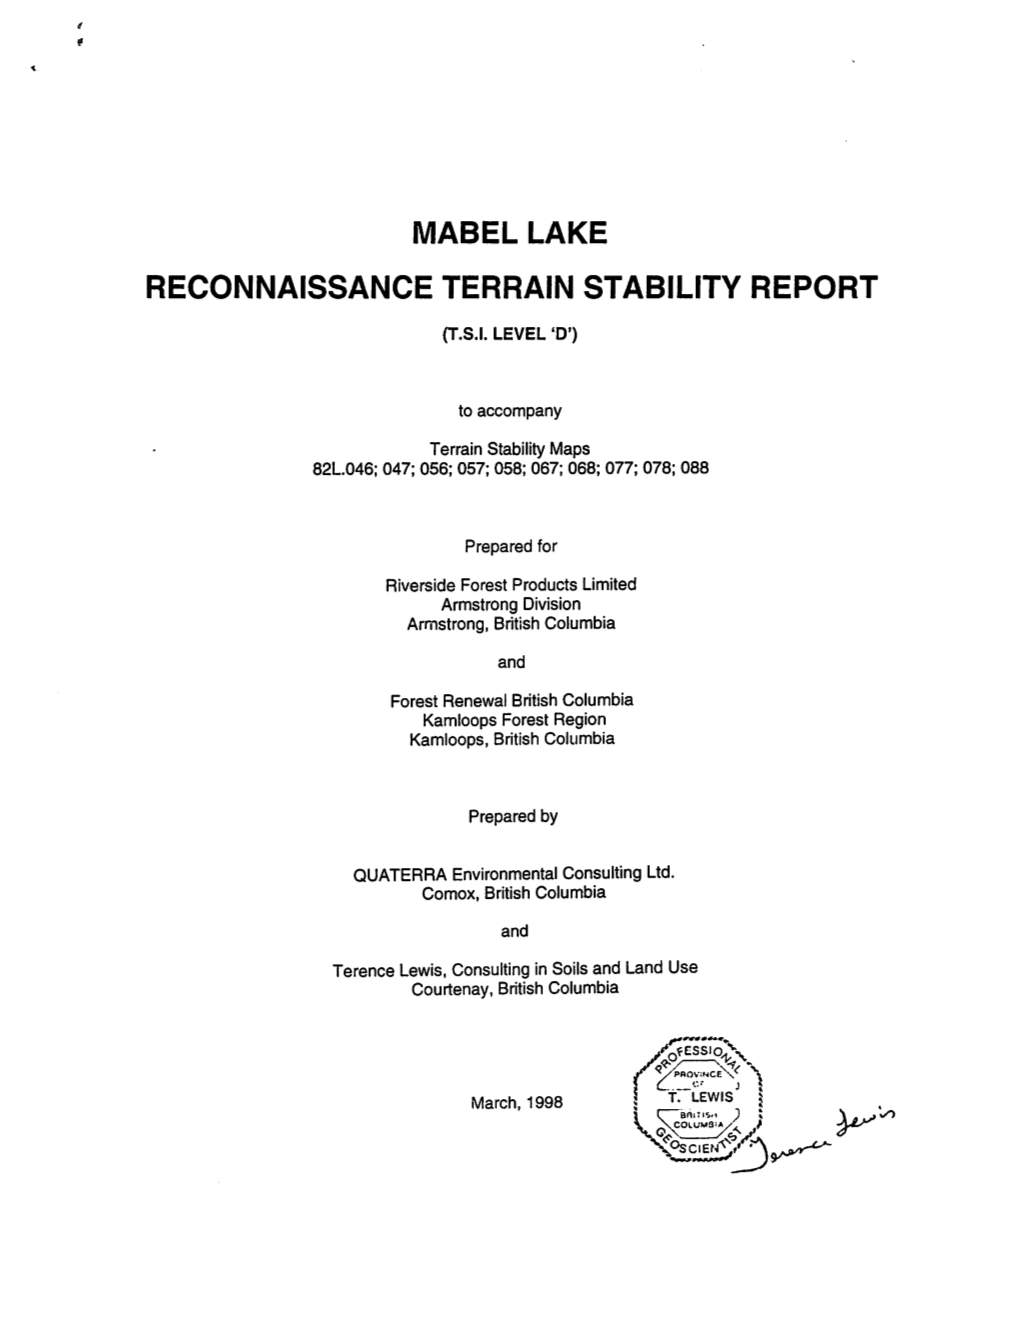 Mabel Lake Reconnaissance Terrain Stability Report